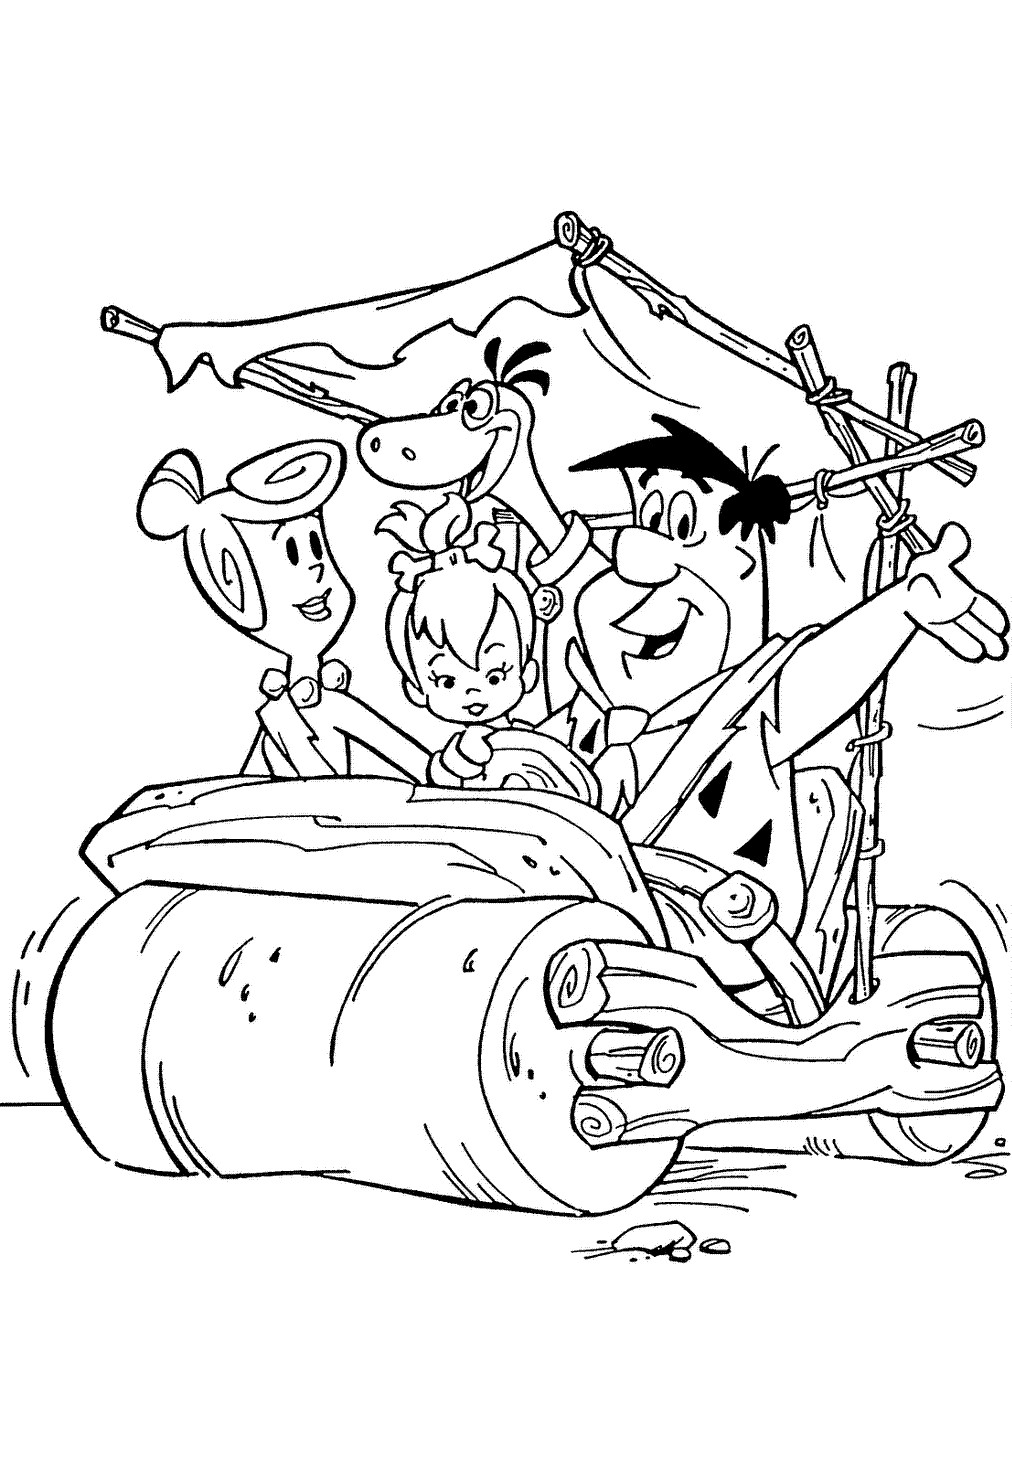 Free Printable Coloring Books
 Flintstones Coloring Pages